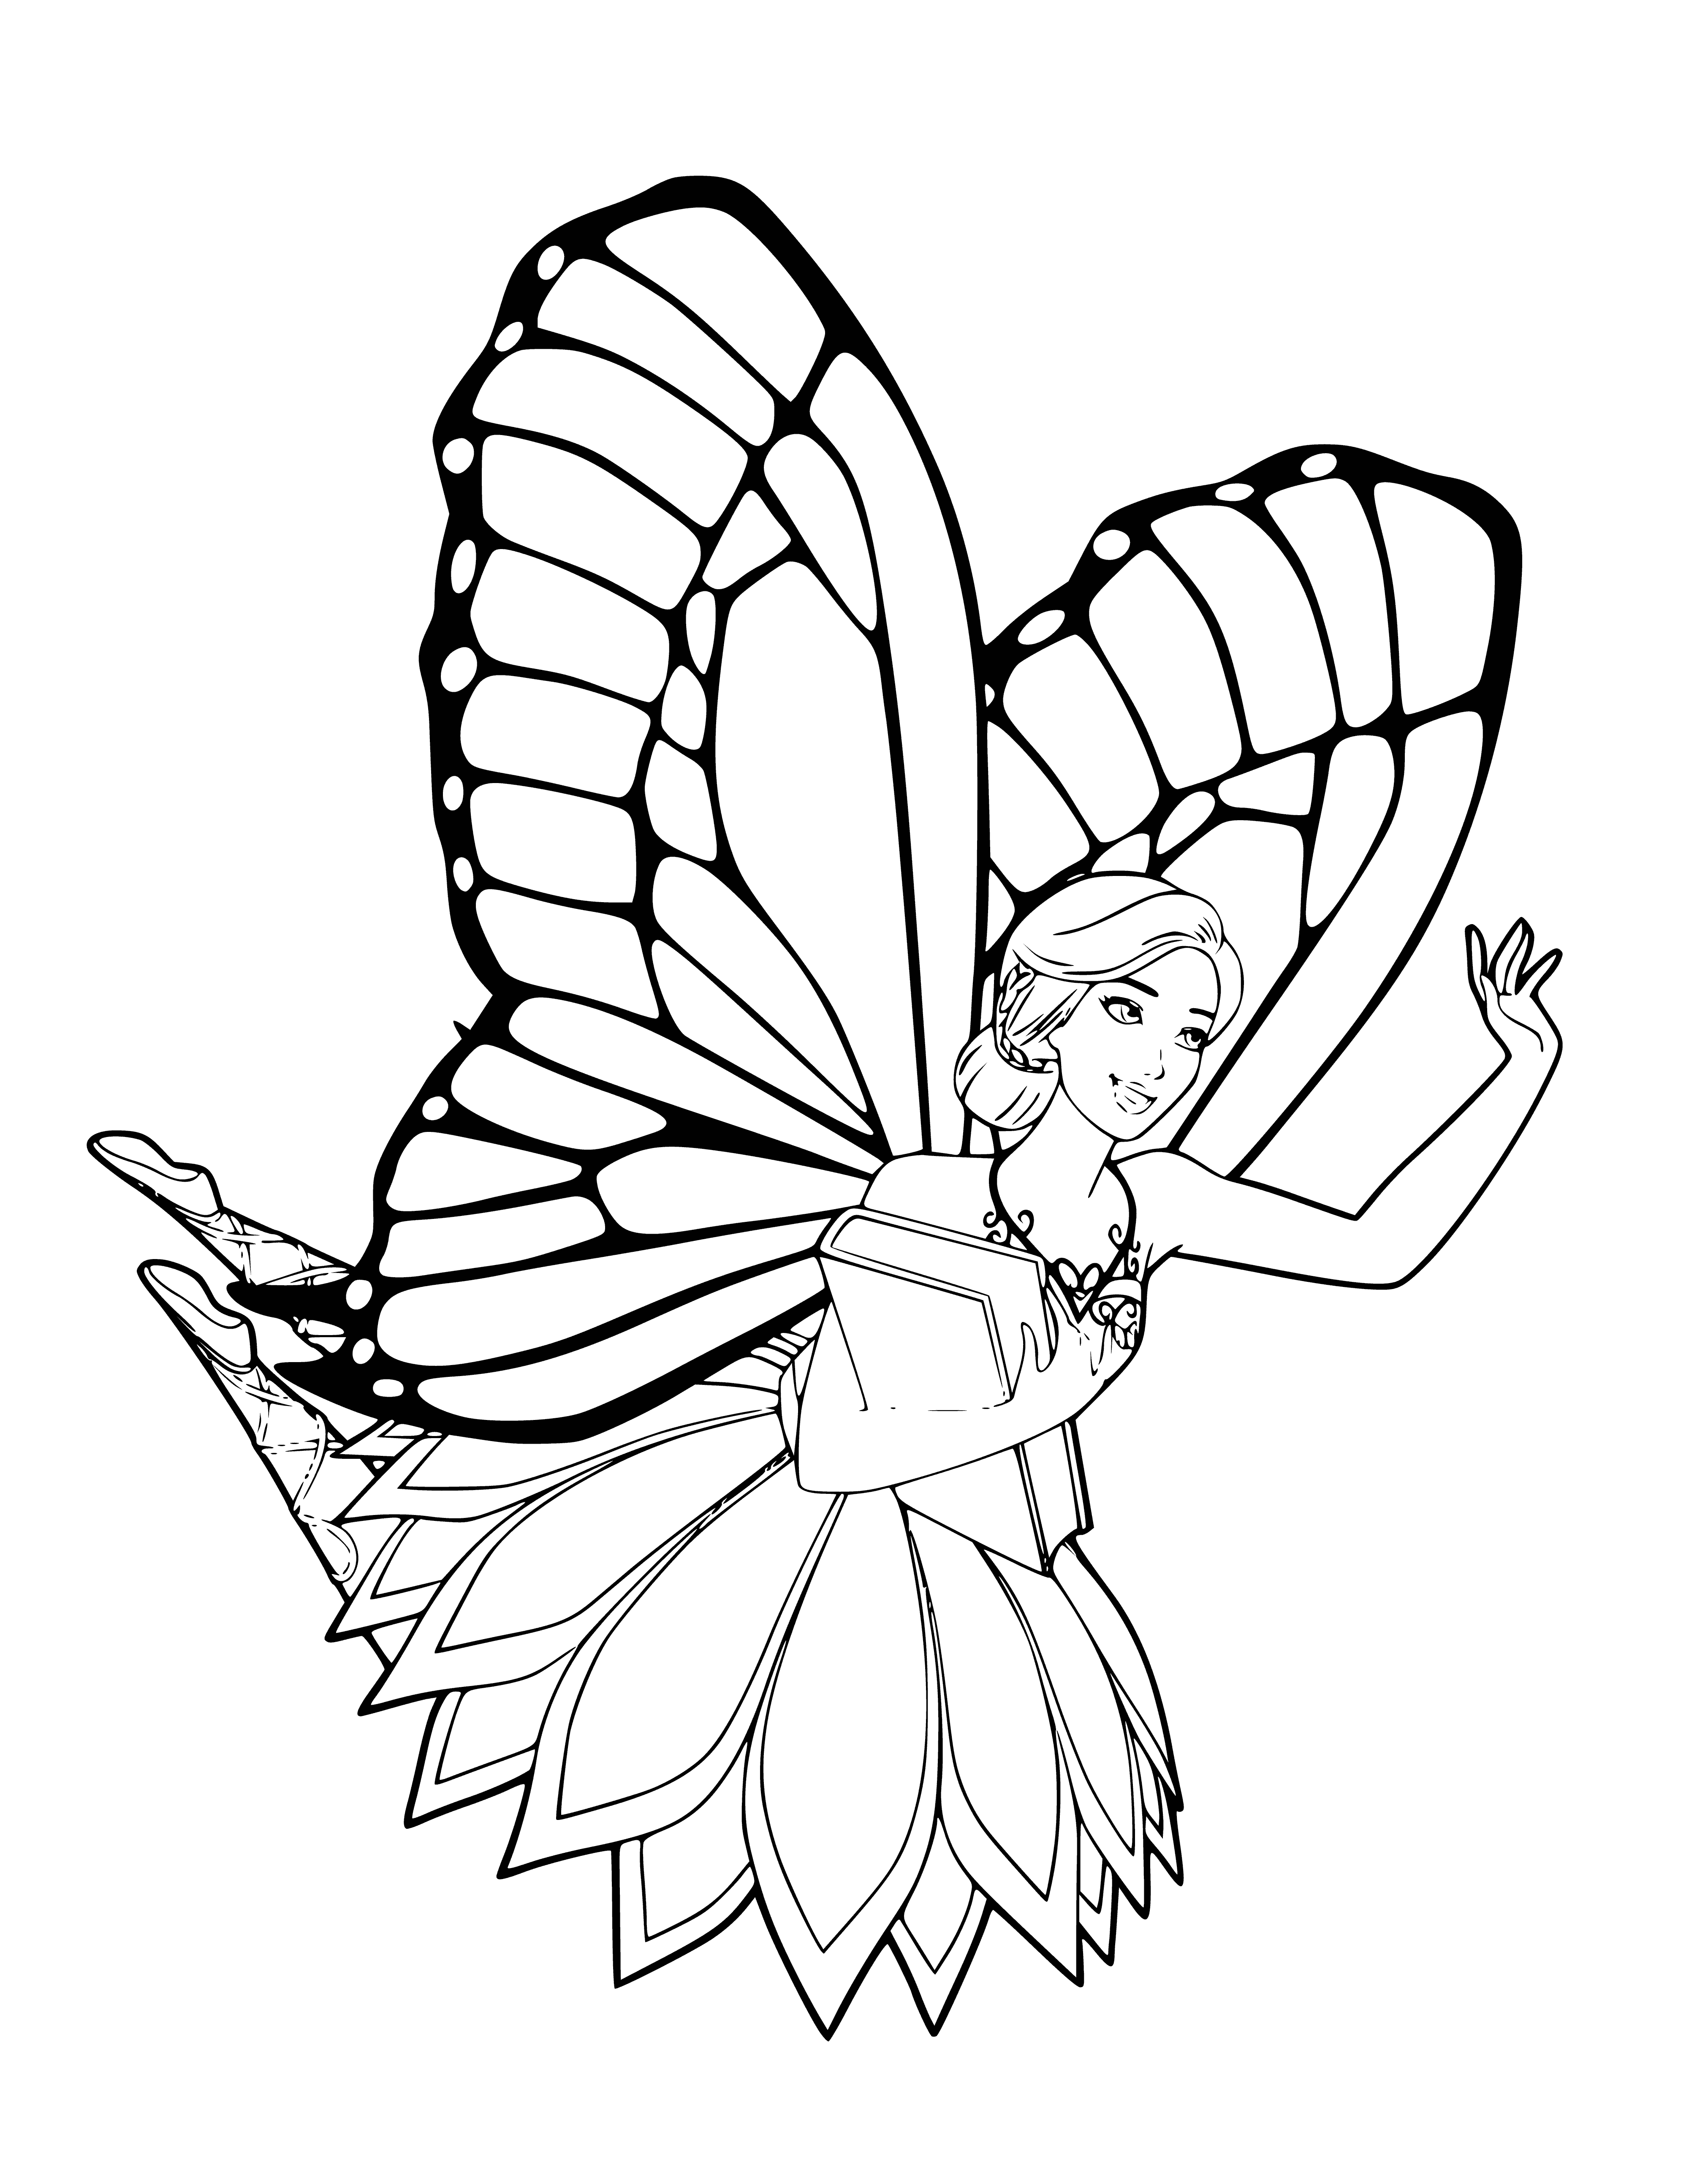 coloring page: Barbie Fairy Mariposa loves to fly & dance in her flower garden, wearing her pink & purple glittery-winged dress & silver tiara w/ a pink gem.